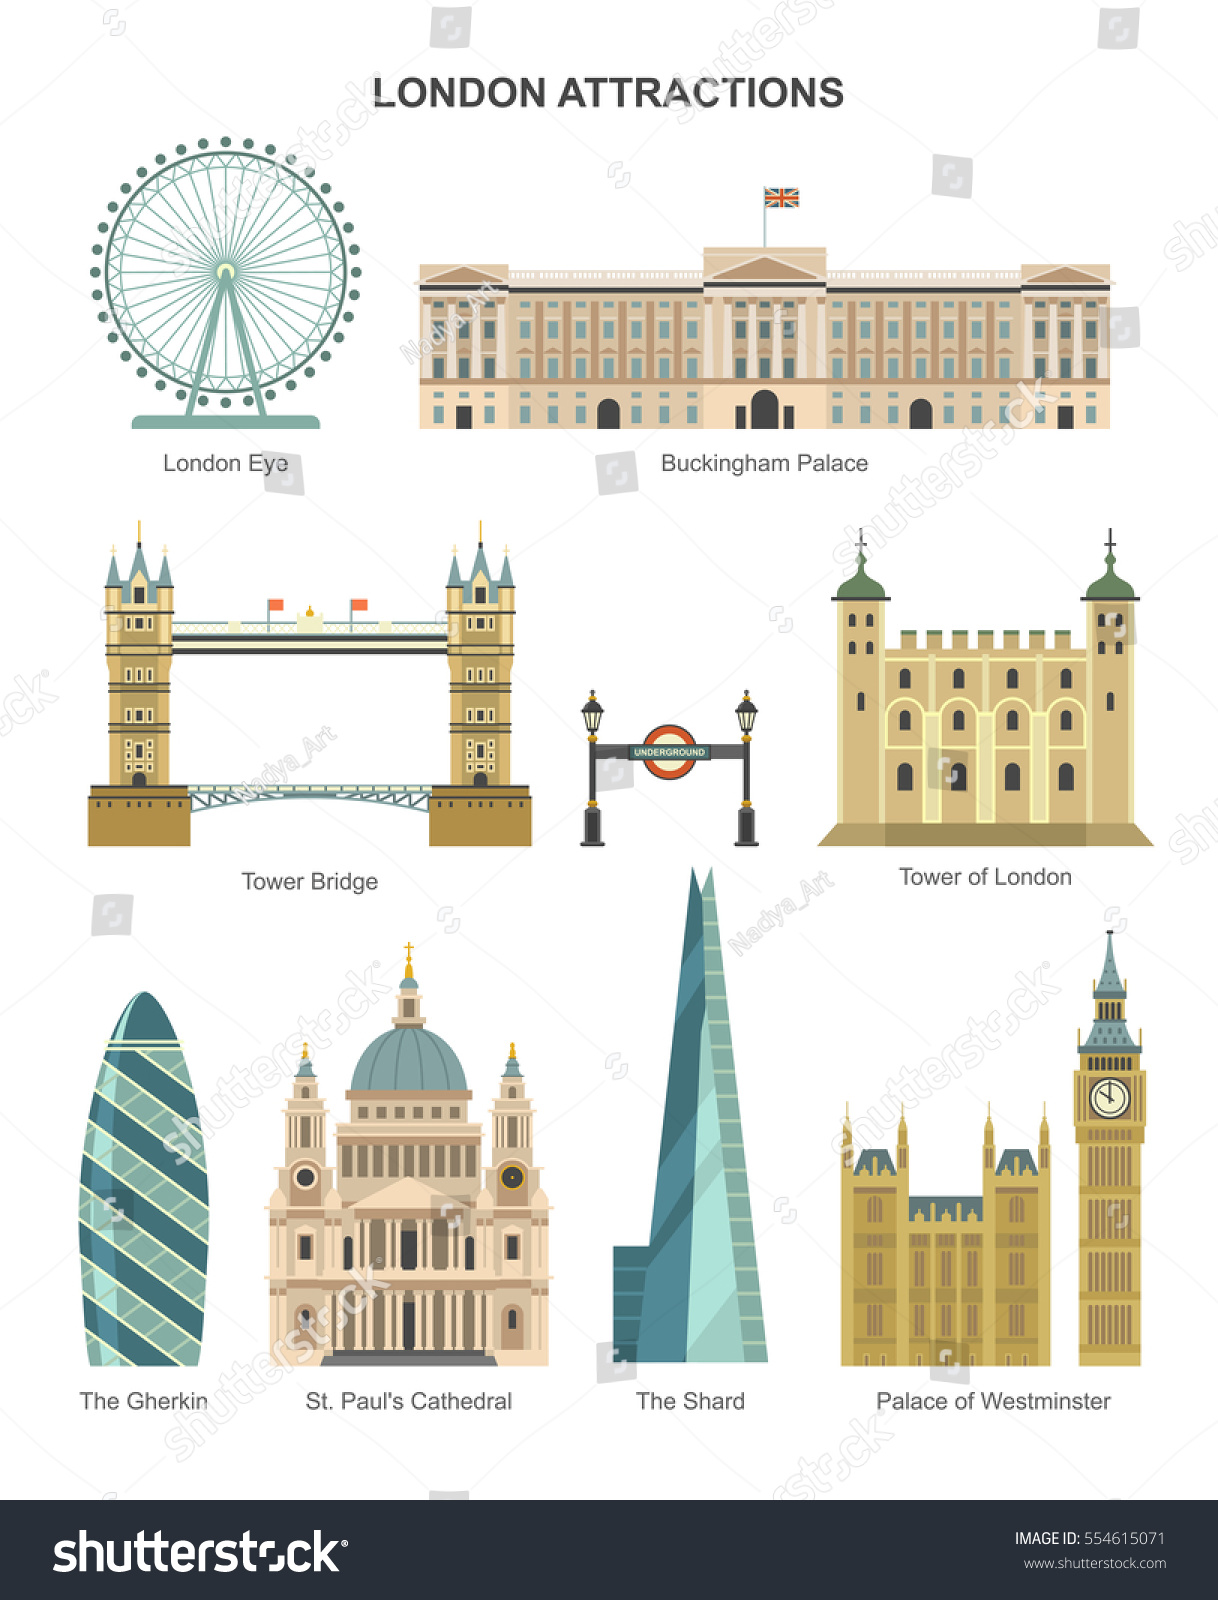 SVG of London architecture. Vector collection of London attractions, such as London Eye, Tower of London, The Shard, Buckingham Palace, Tower Bridge. Isolated on white. svg